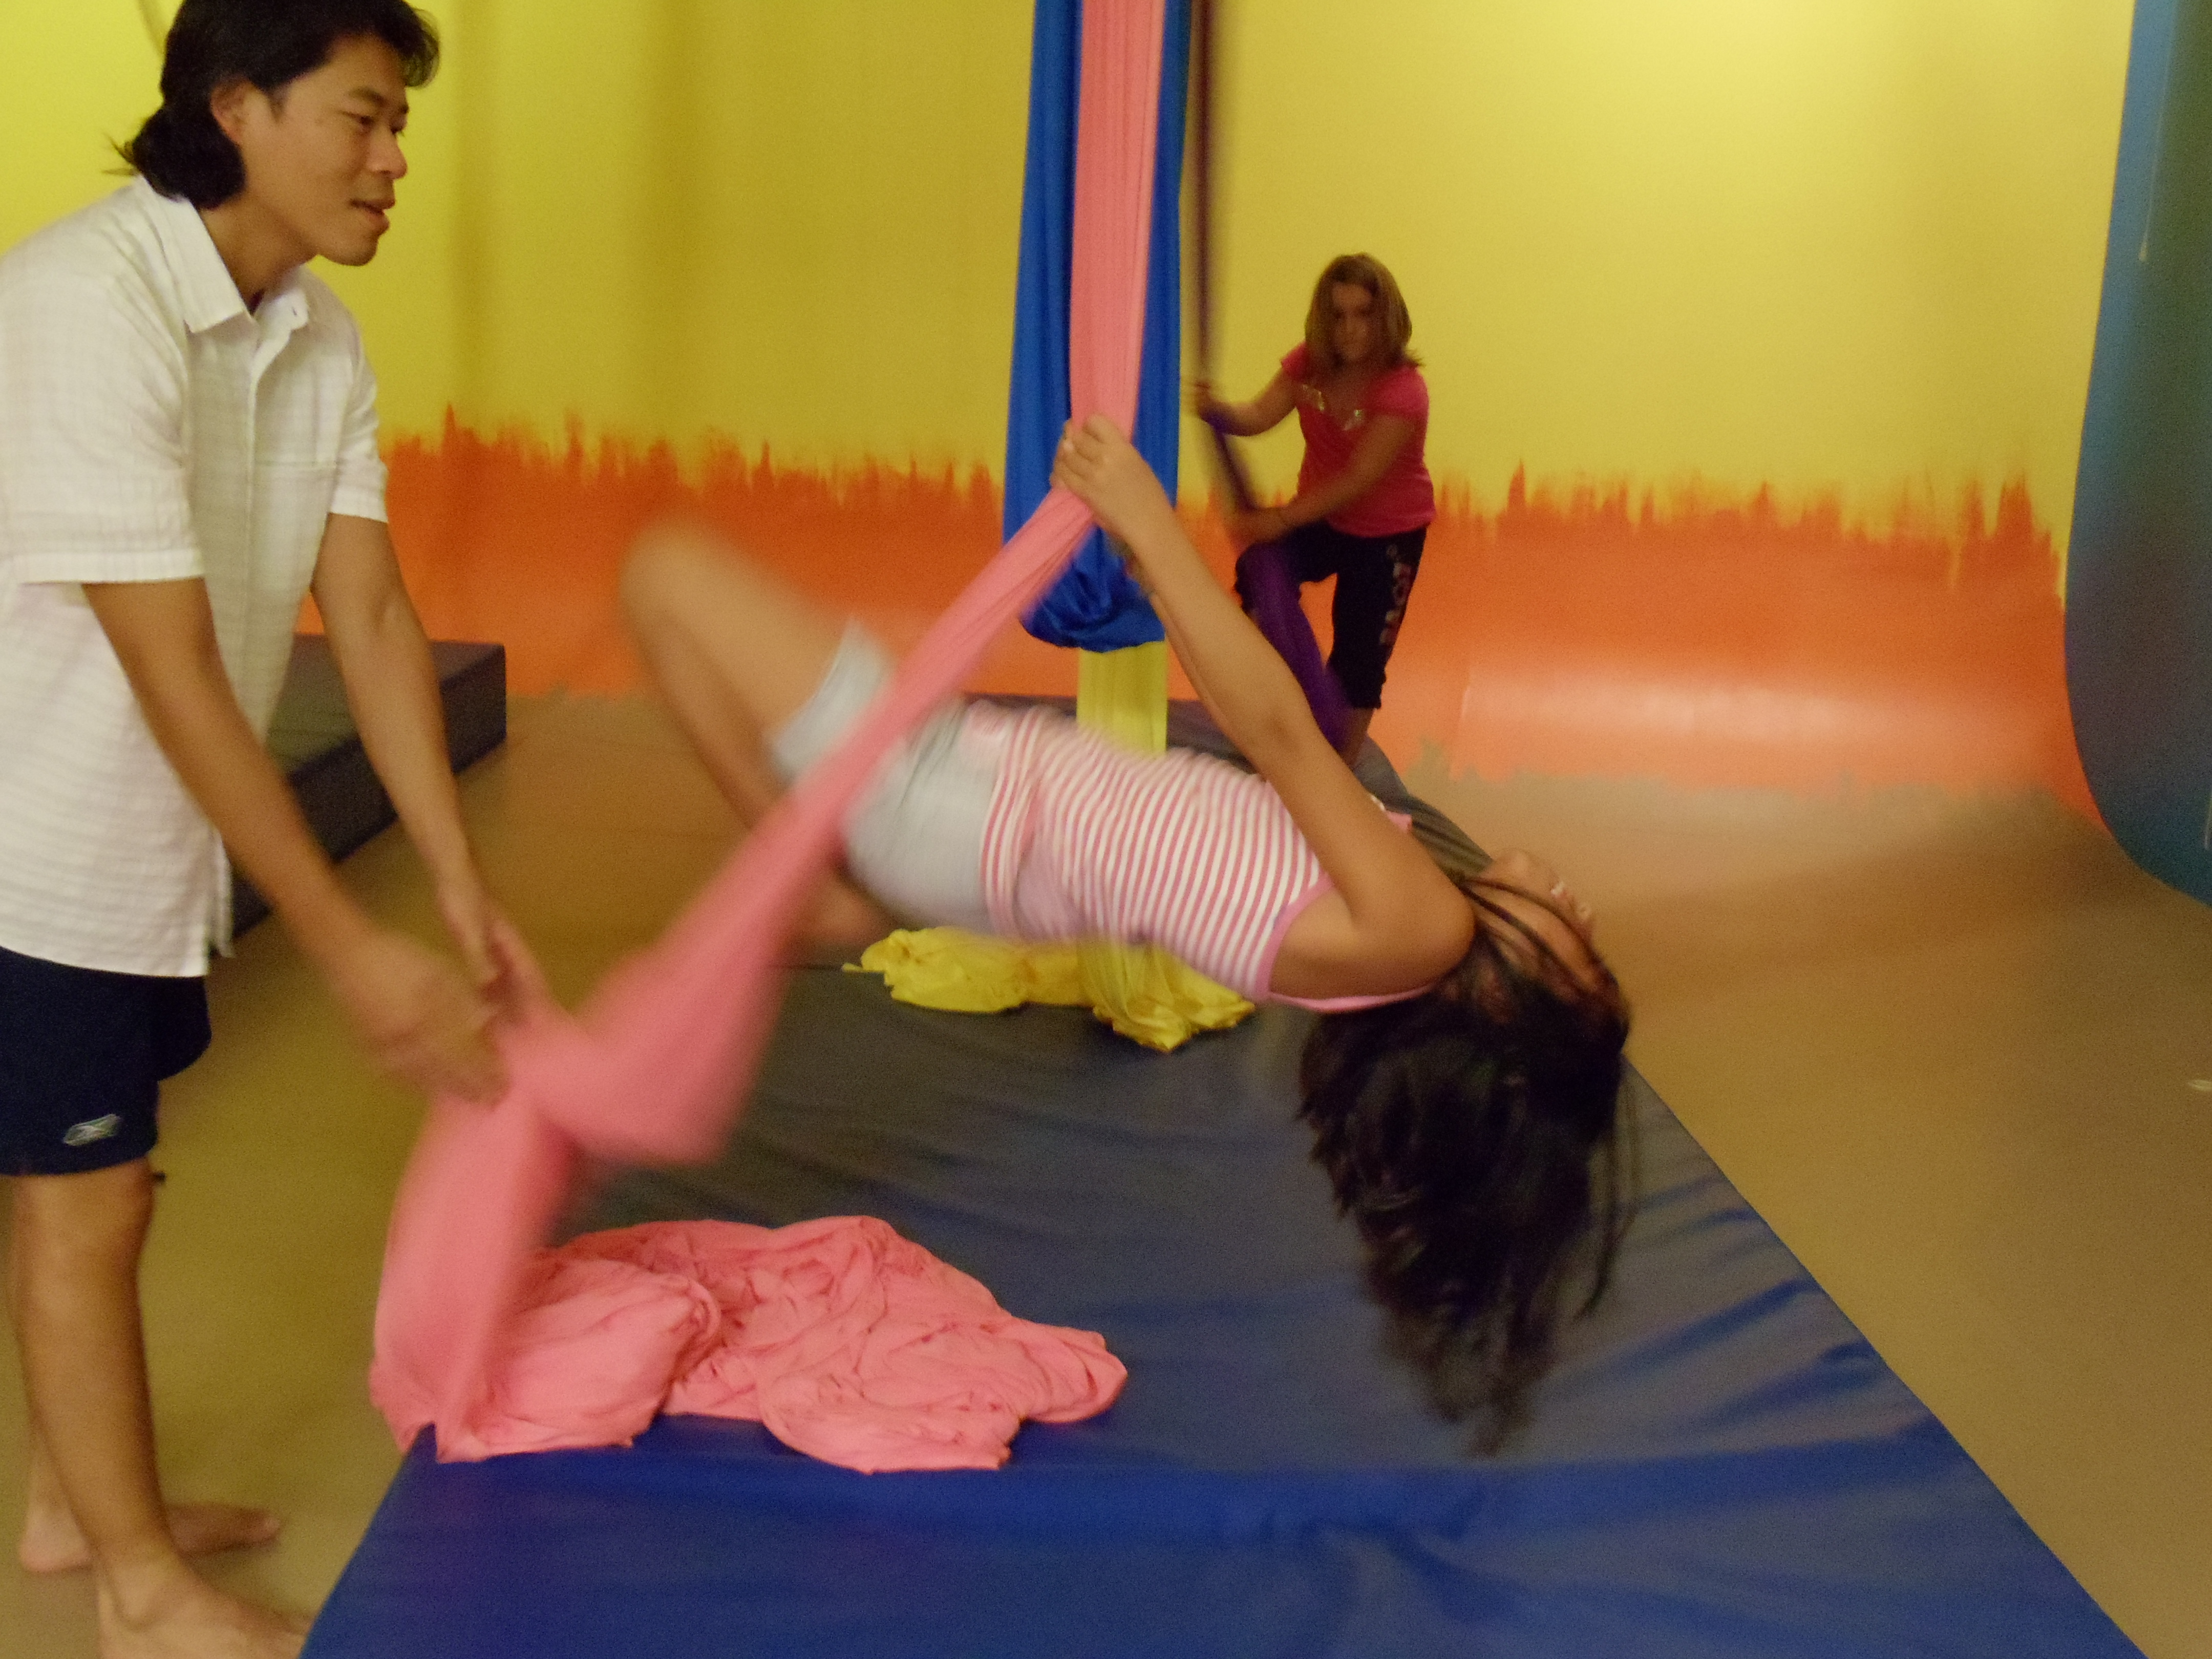 NOW THERE ARE TWO KID’S AERIAL CLASSES EACH WEEK!